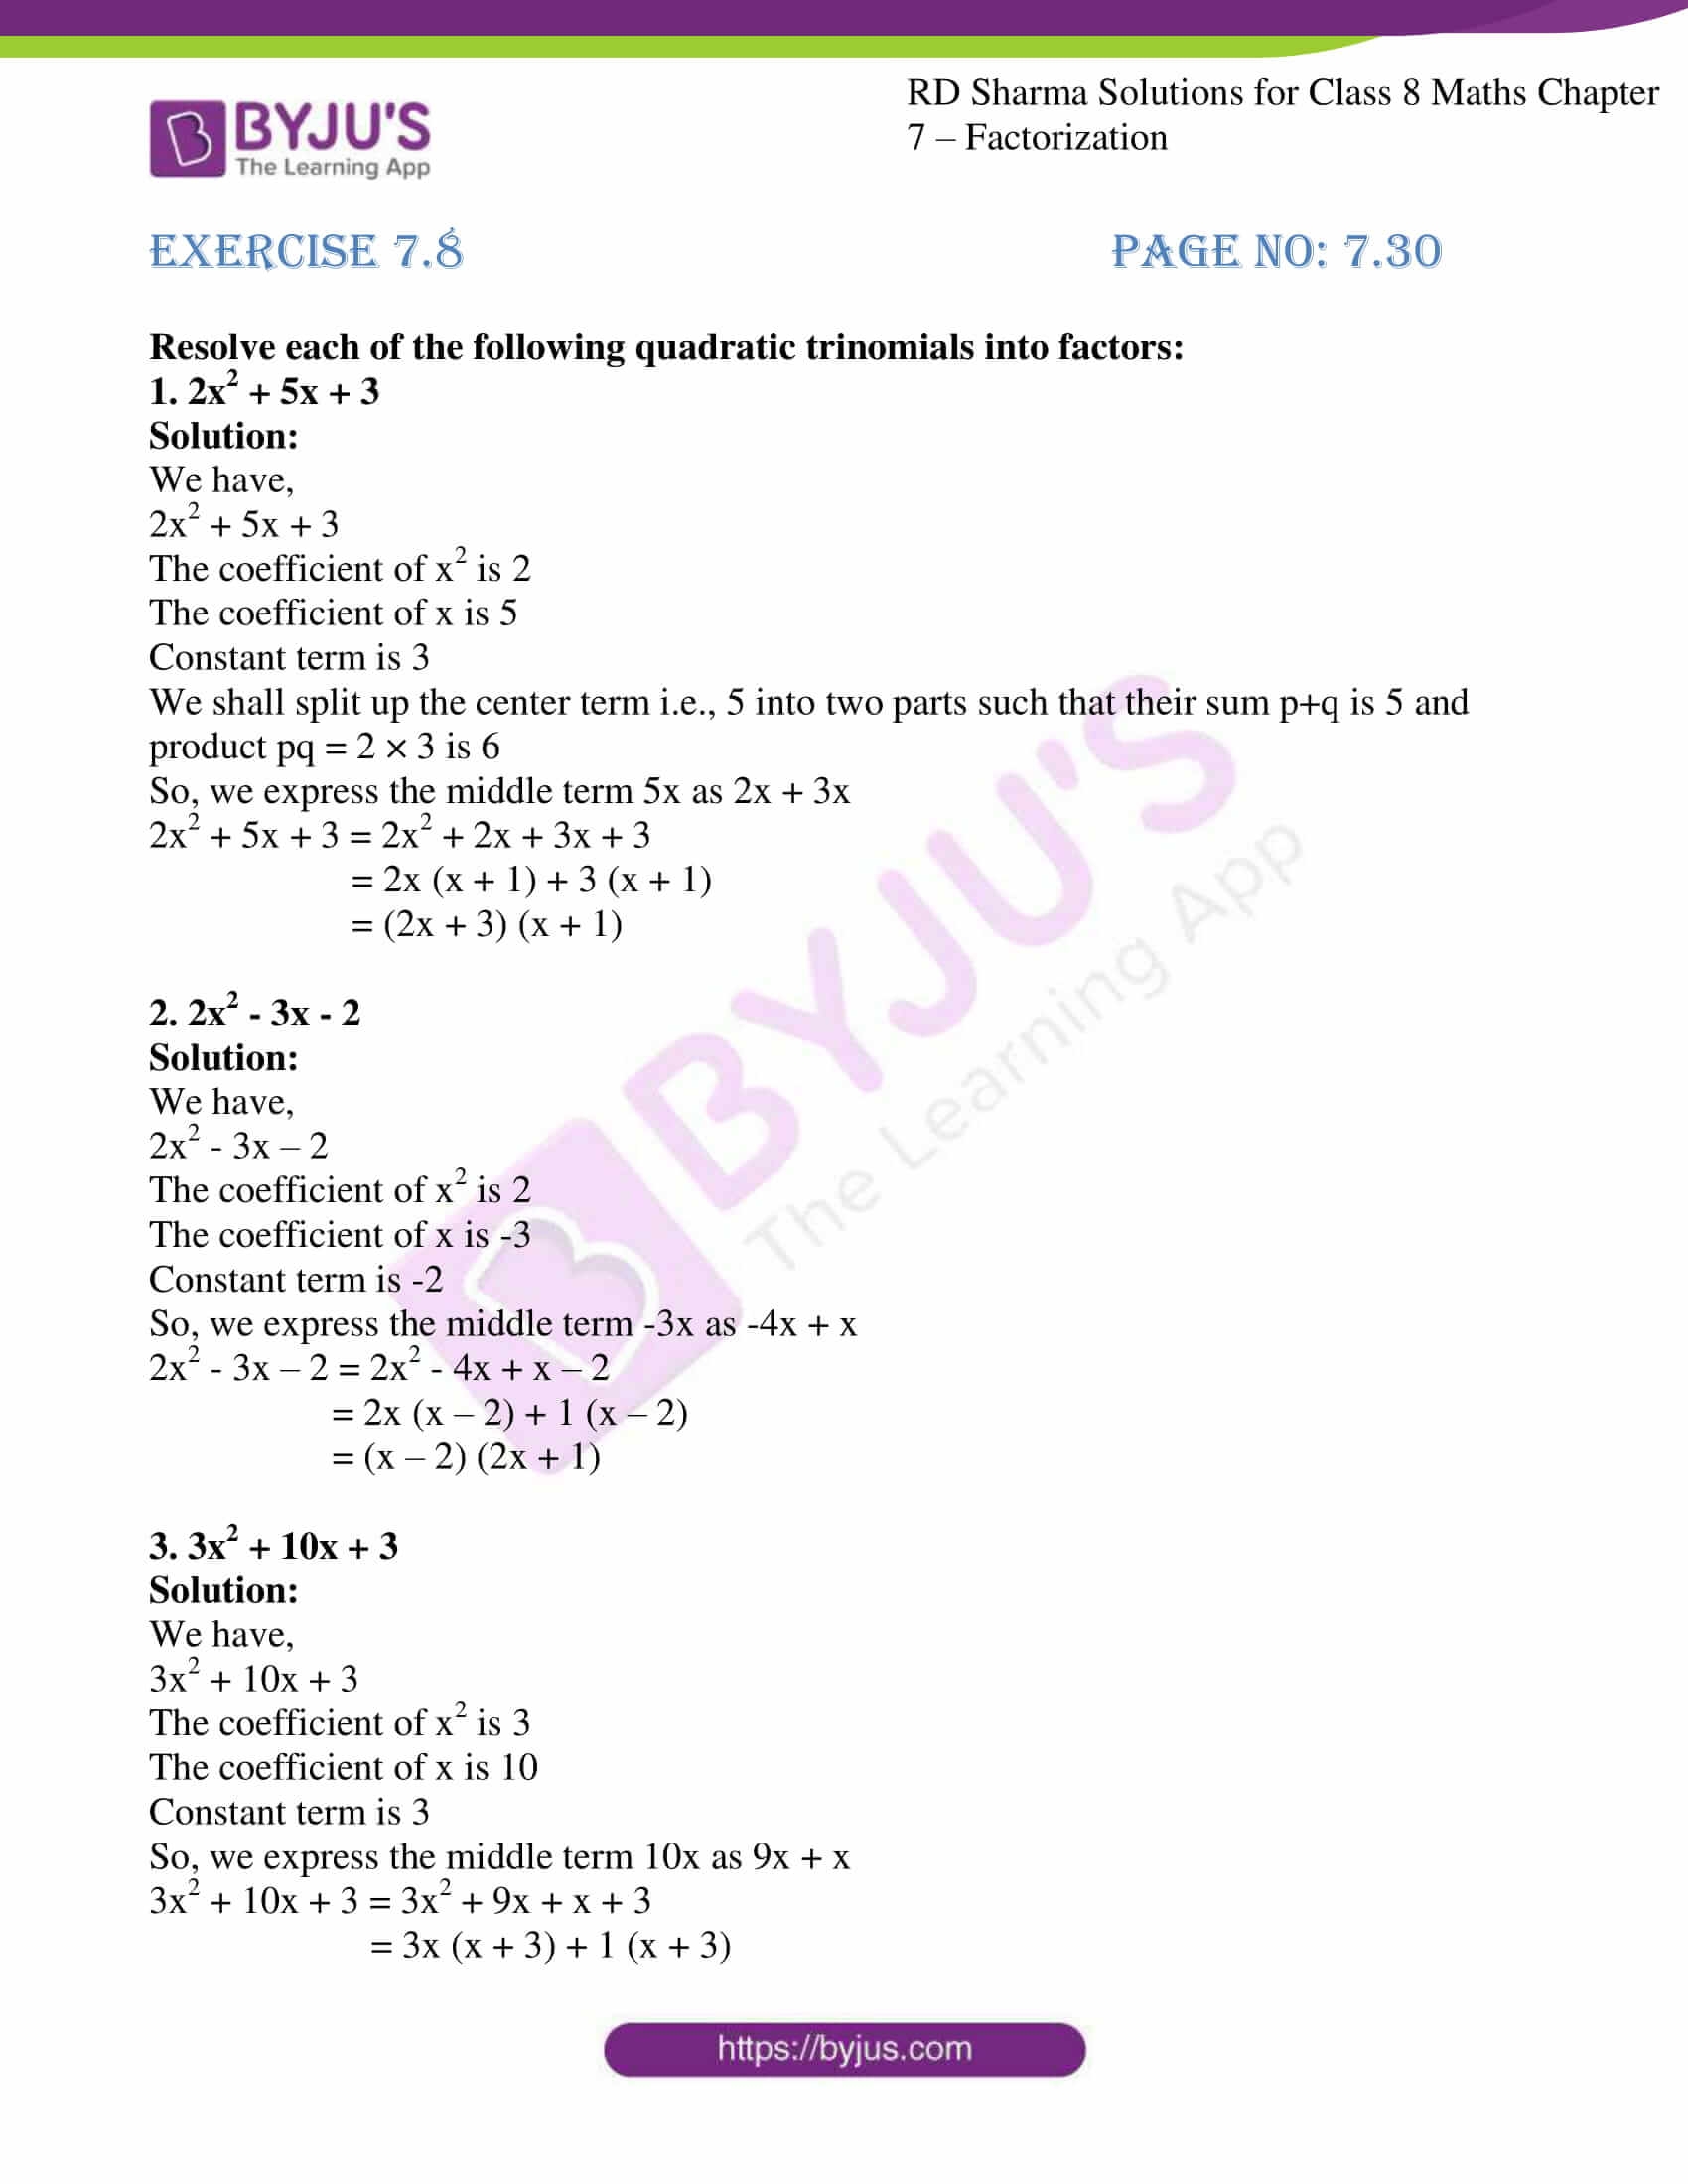 rd-sharma-solutions-for-class-8-chapter-7-factorization-exercise-7-8-free-pdf-is-available-here